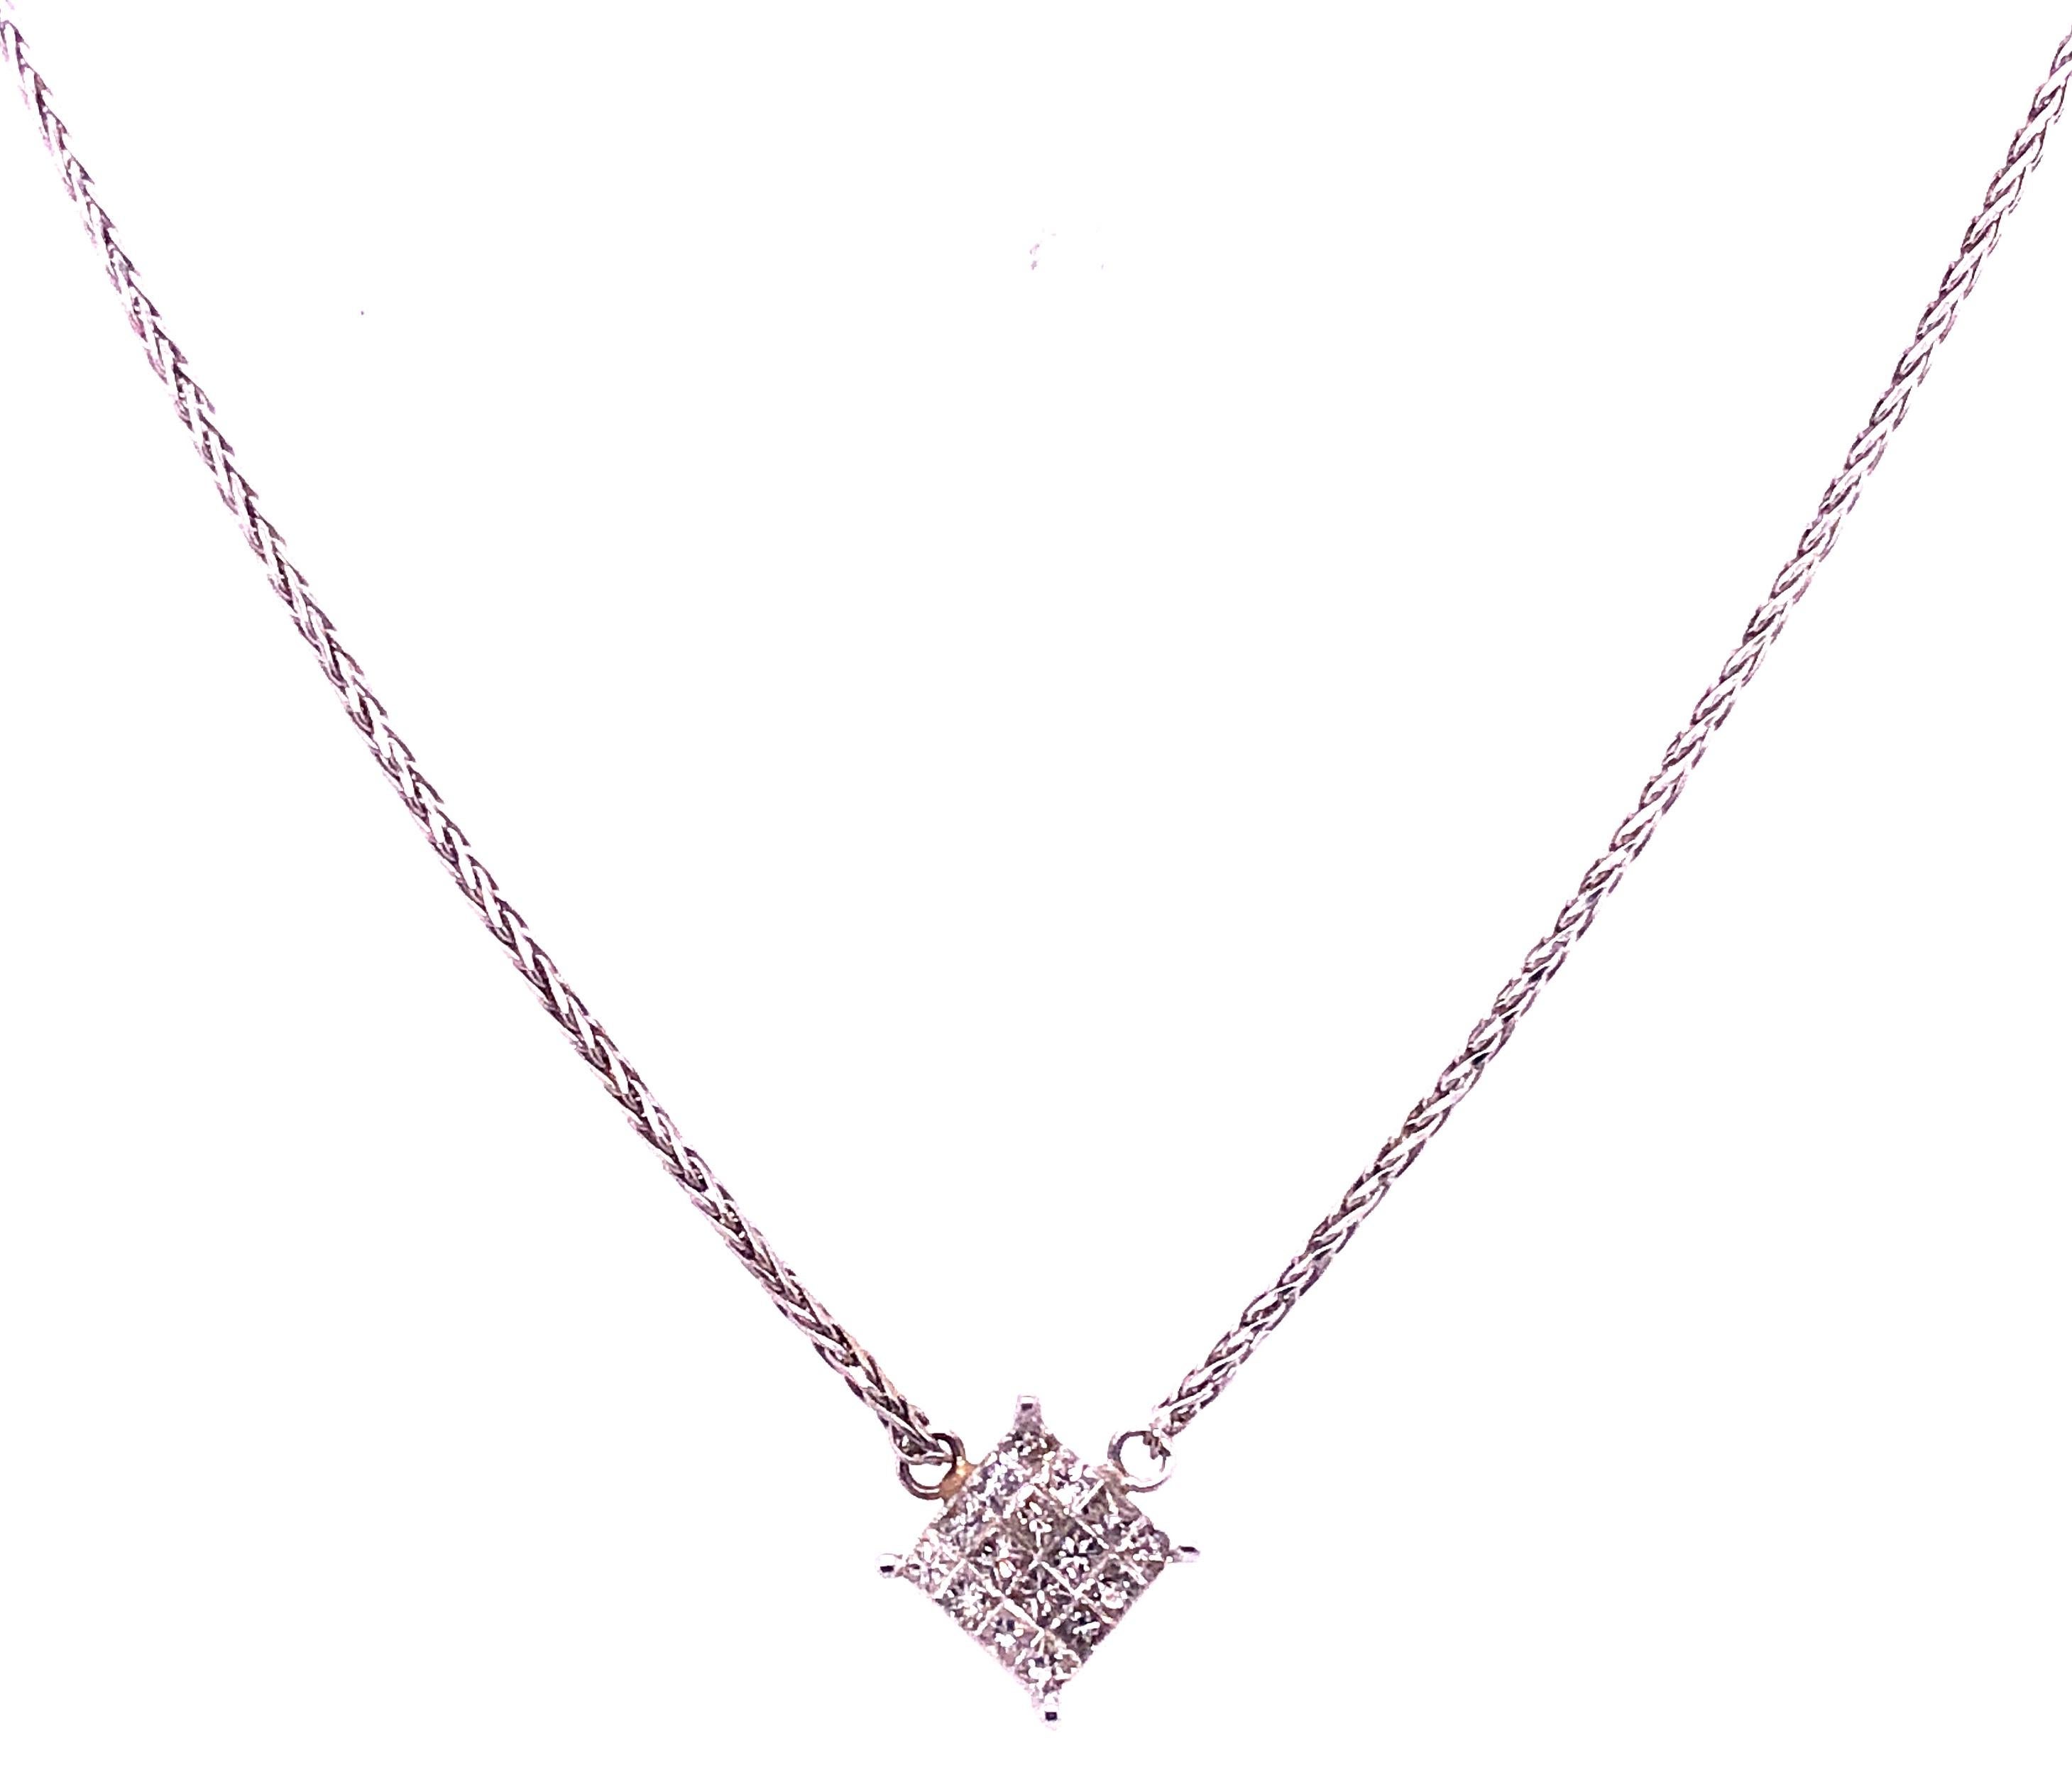 14 Karat White Gold Necklace with Diamond Pendant In Good Condition For Sale In Stamford, CT